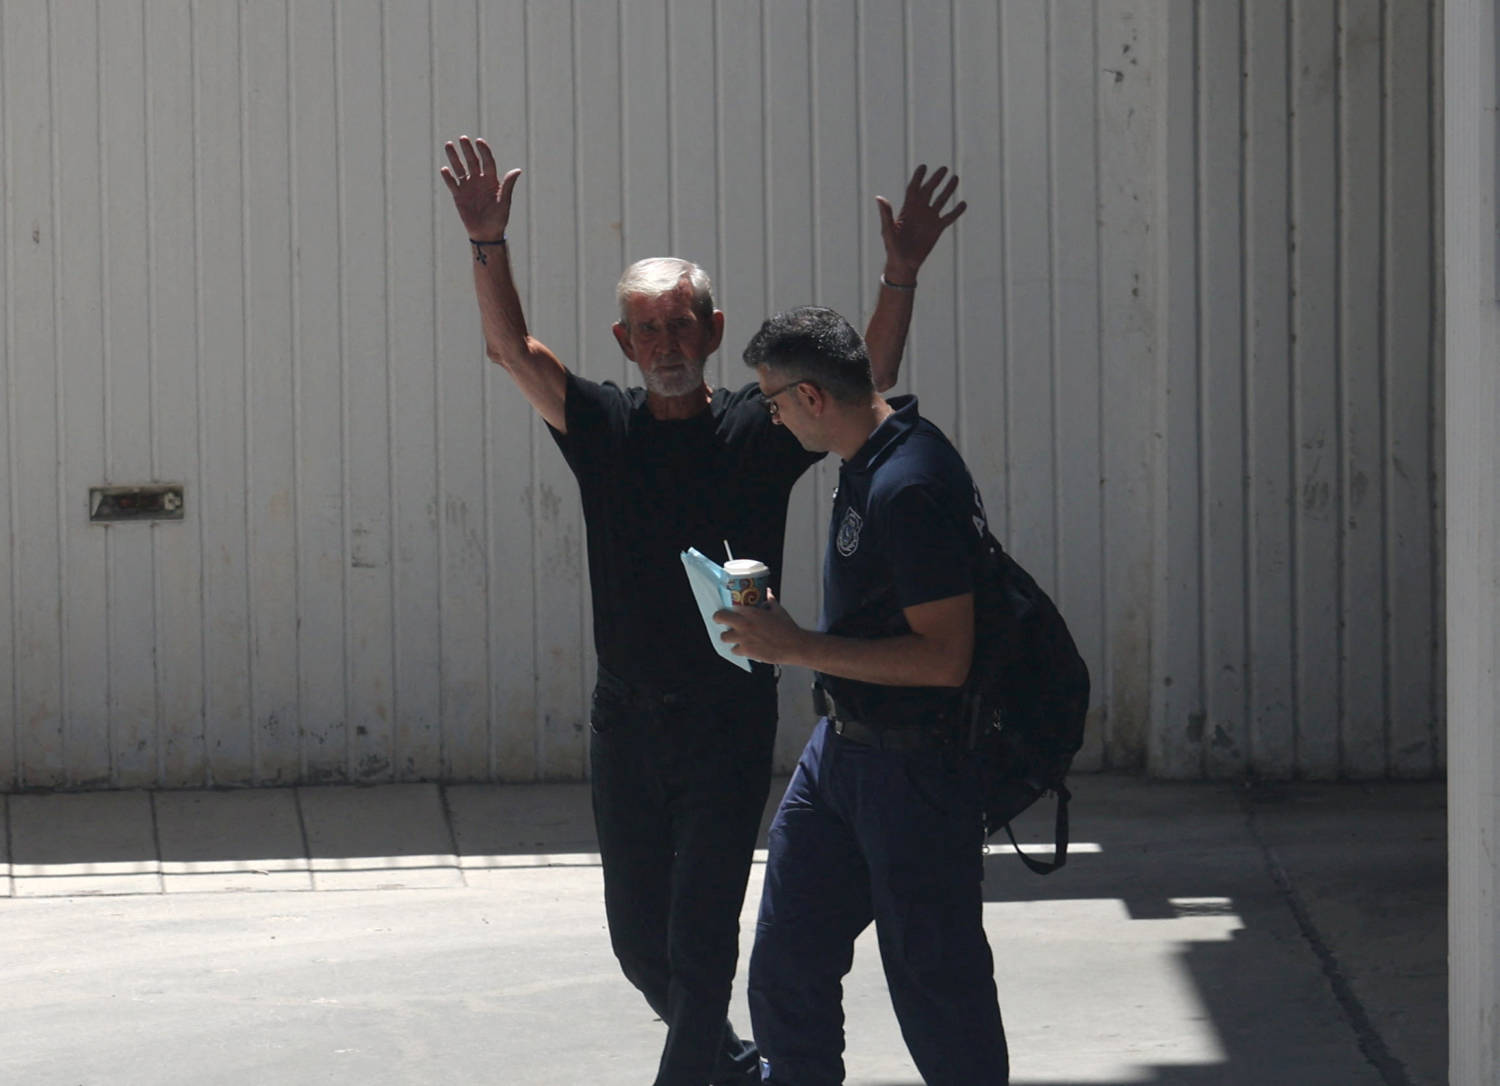 British Pensioner David Hunter Waves At Journalists While Being Escorted To A Police Van Outside A Courthouse In Paphos